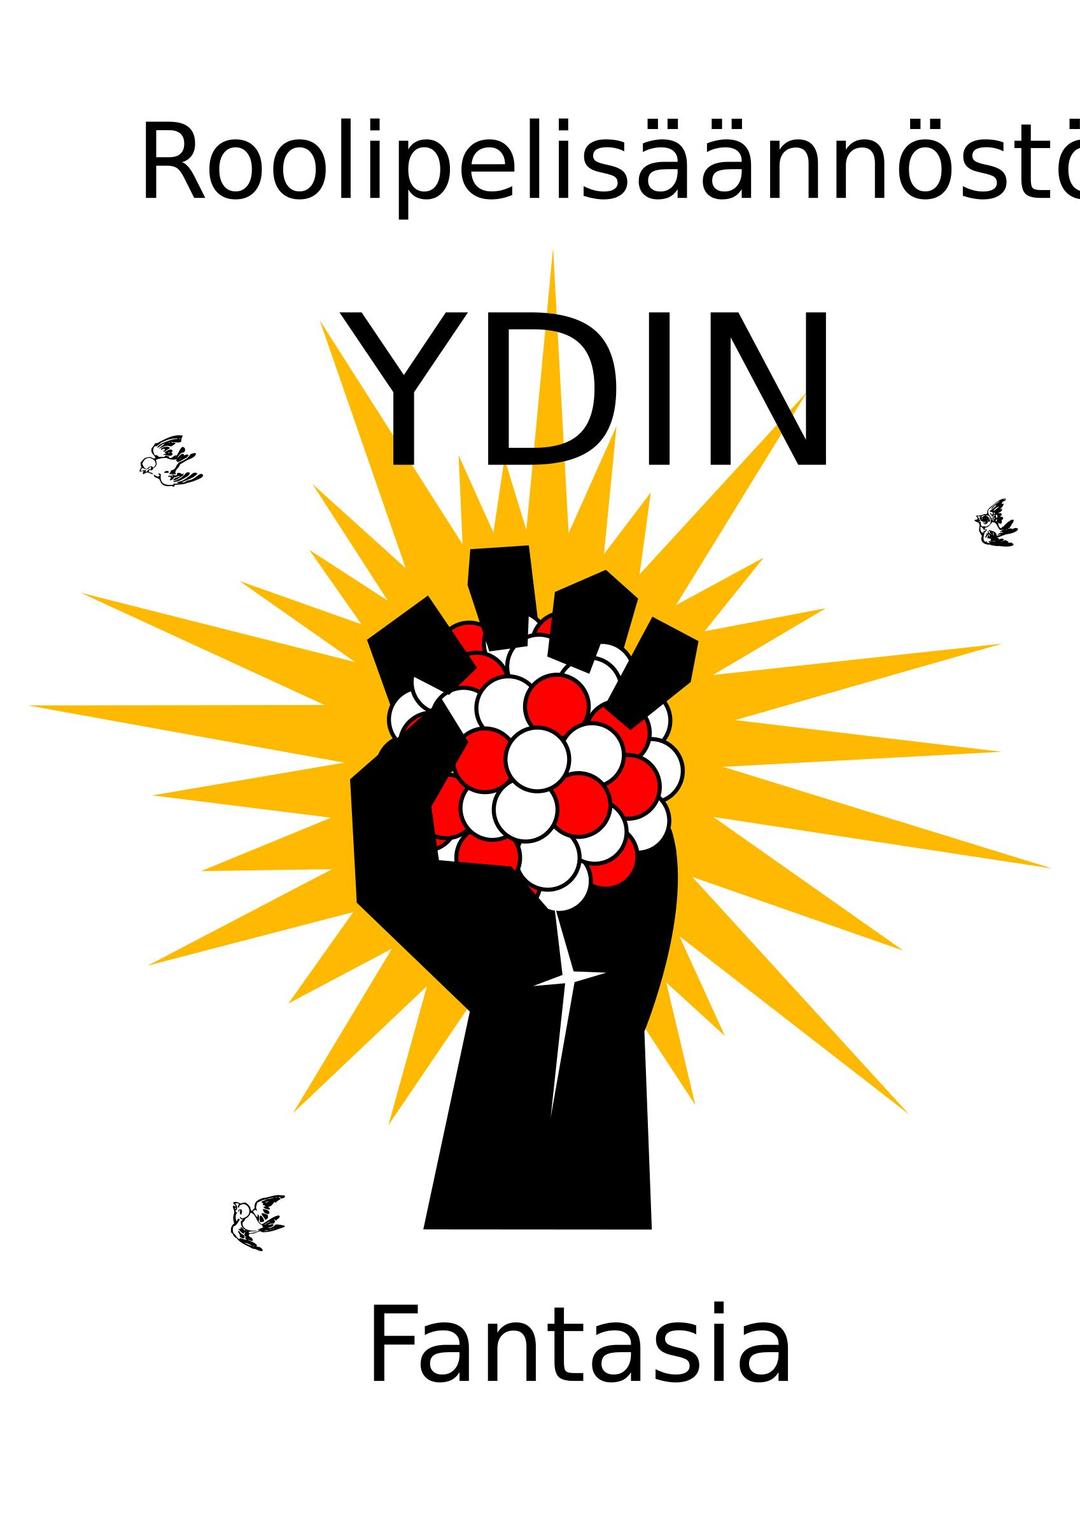 Logo for role-playing game ruleset "YDIN" png transparent